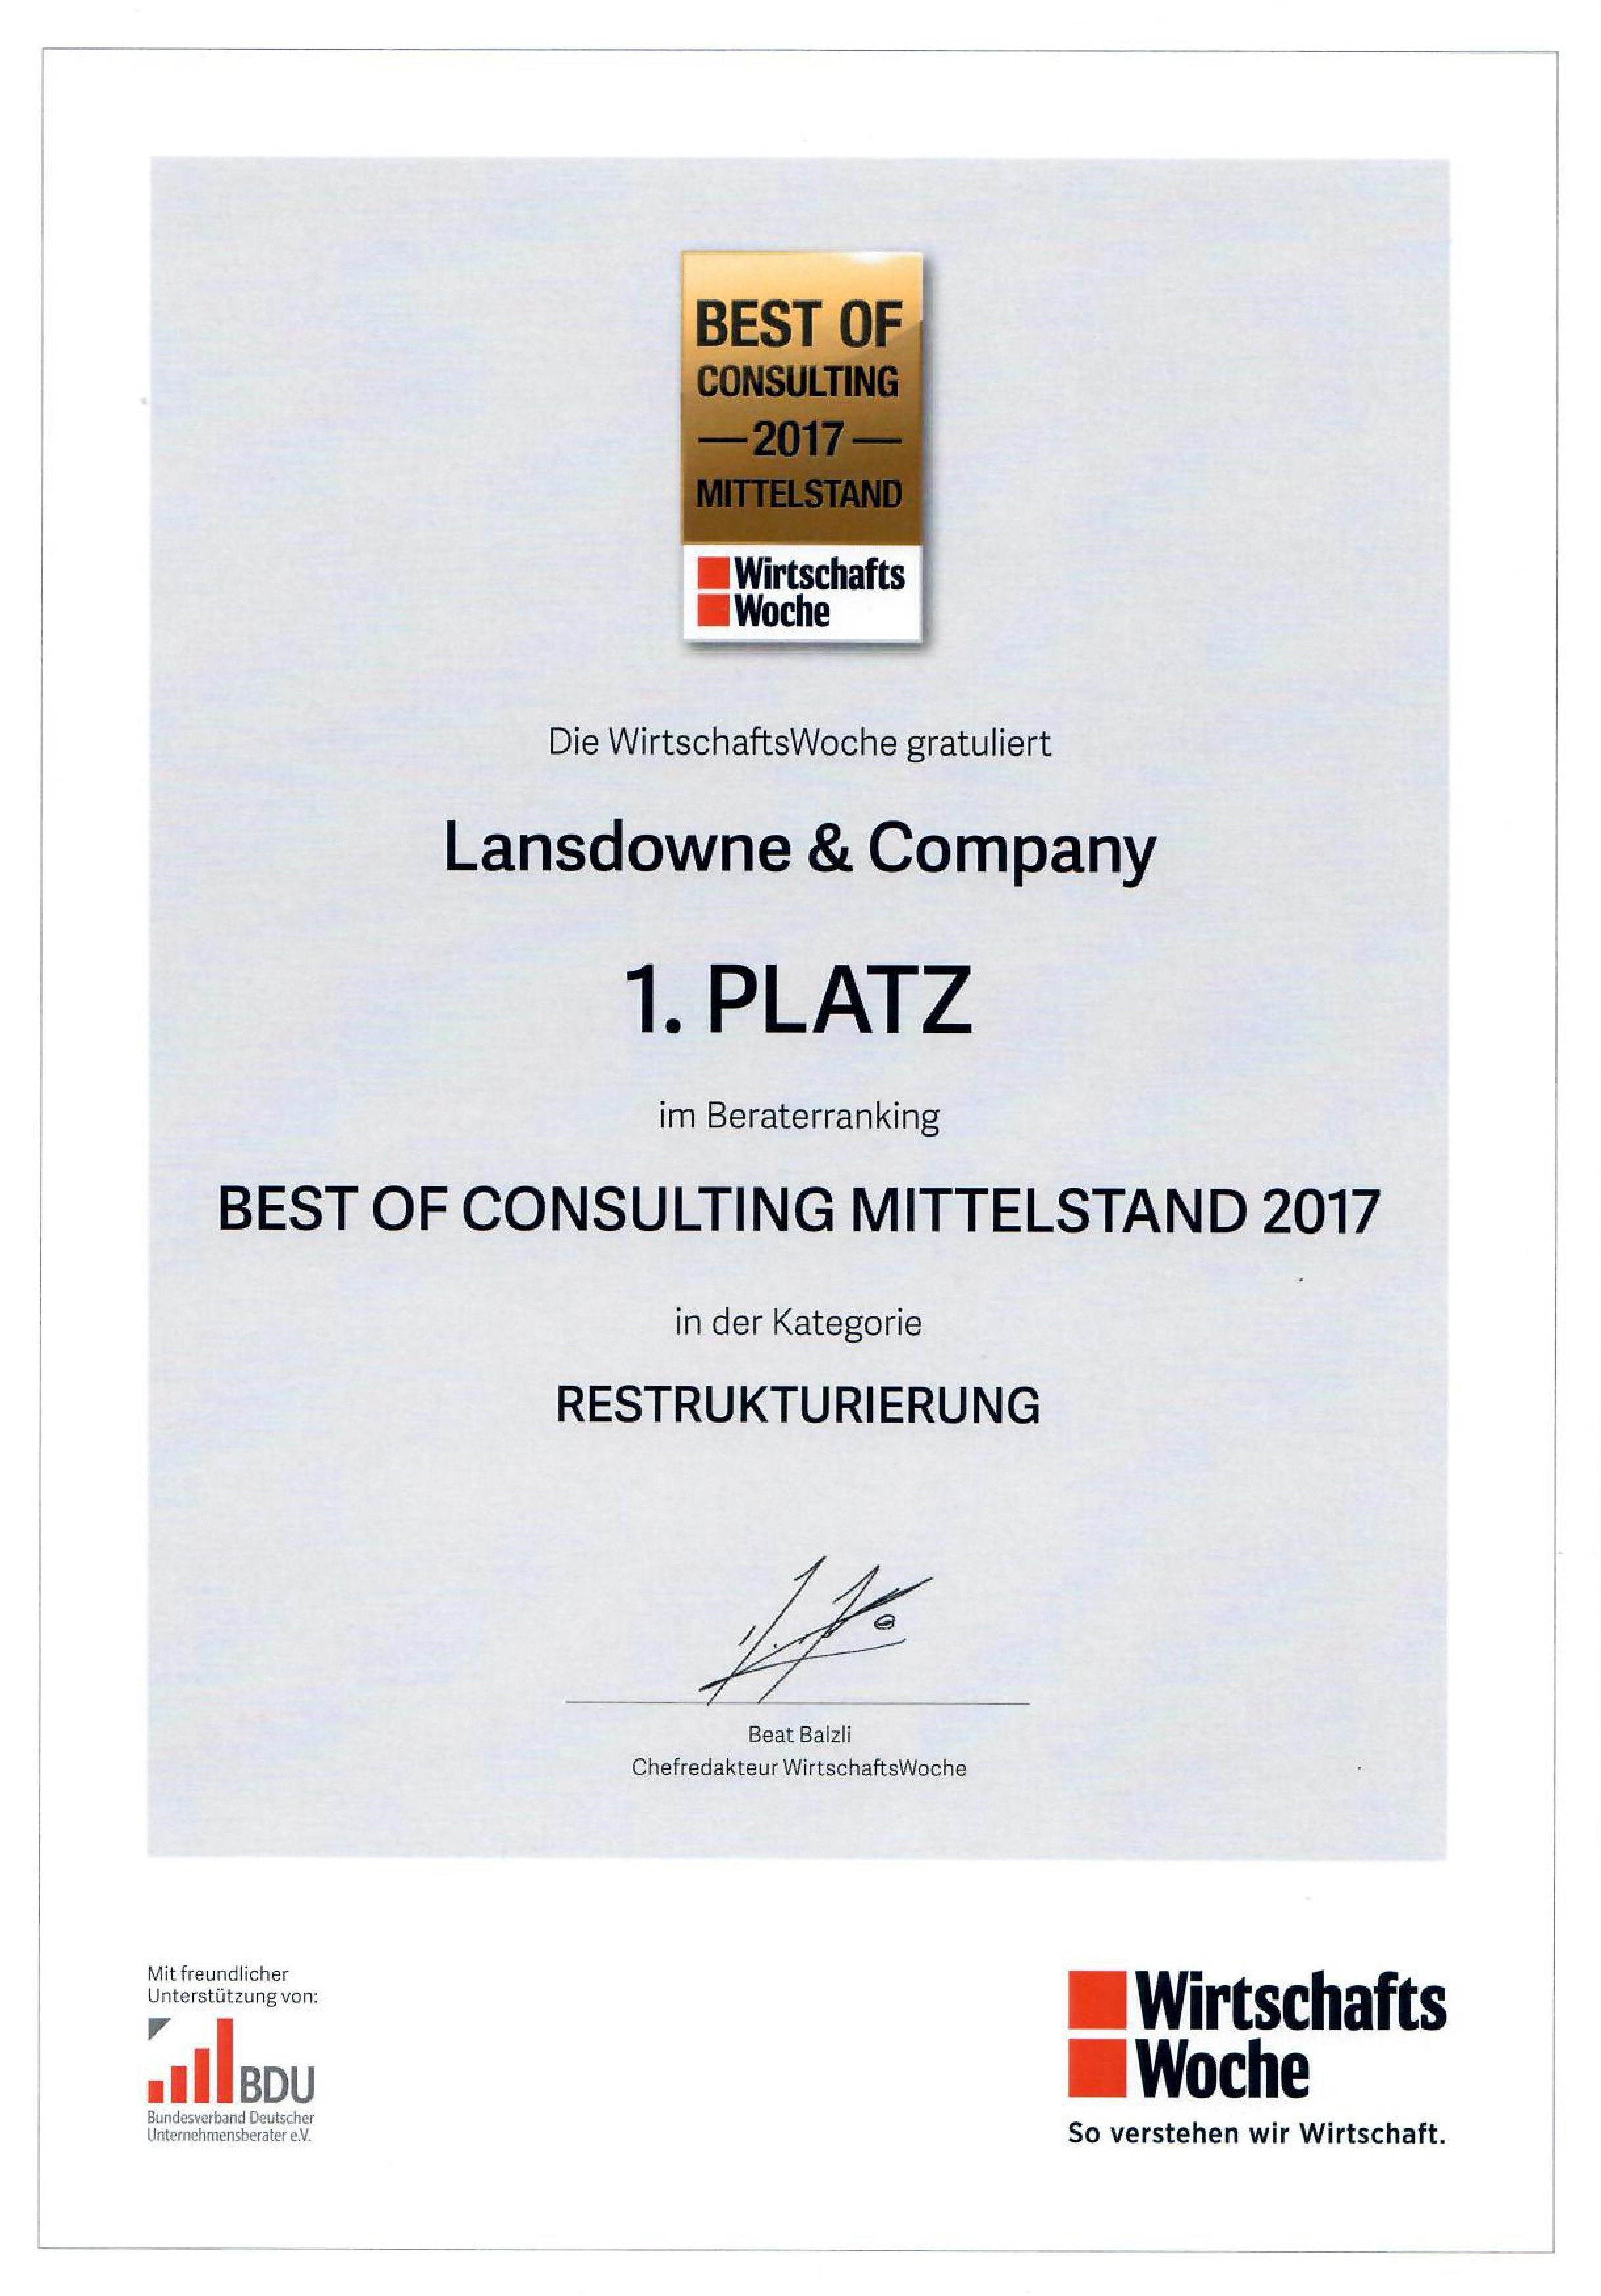 Lansdowne & Company Wins First Place In WirtschaftsWoche Magazine’s Best Of Consulting Competition In The “Restructuring” Category